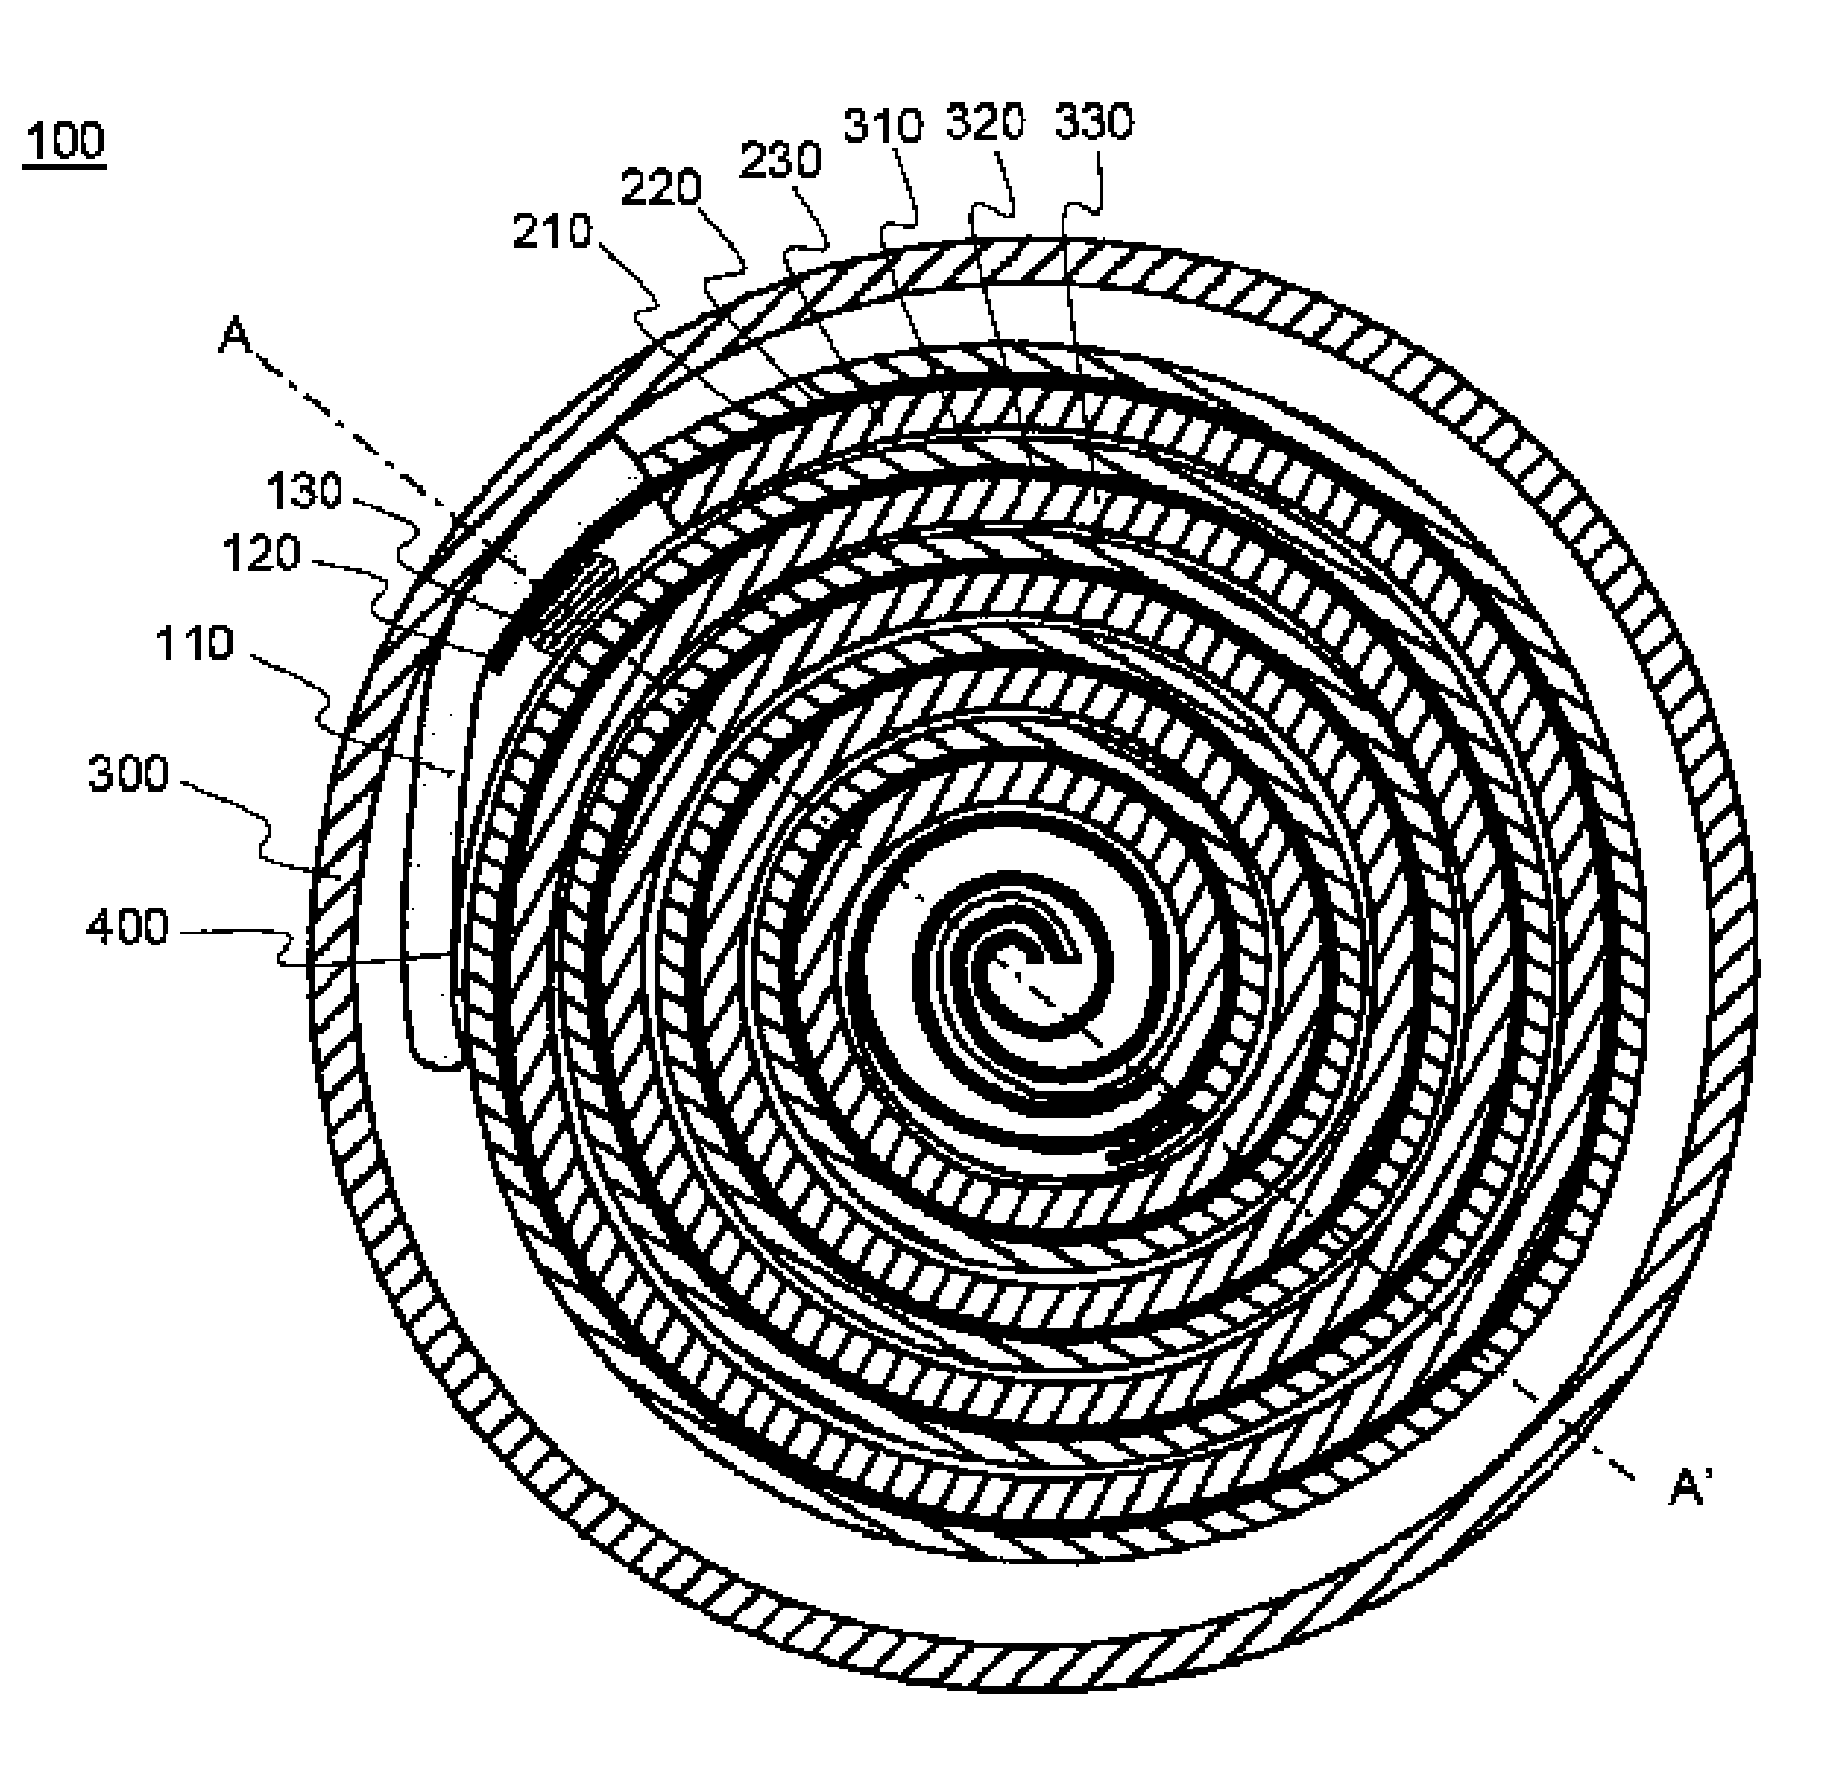 Jelly-roll of structure having elastic member adhered on active material-non-coated portion and secondary battery employed with the same